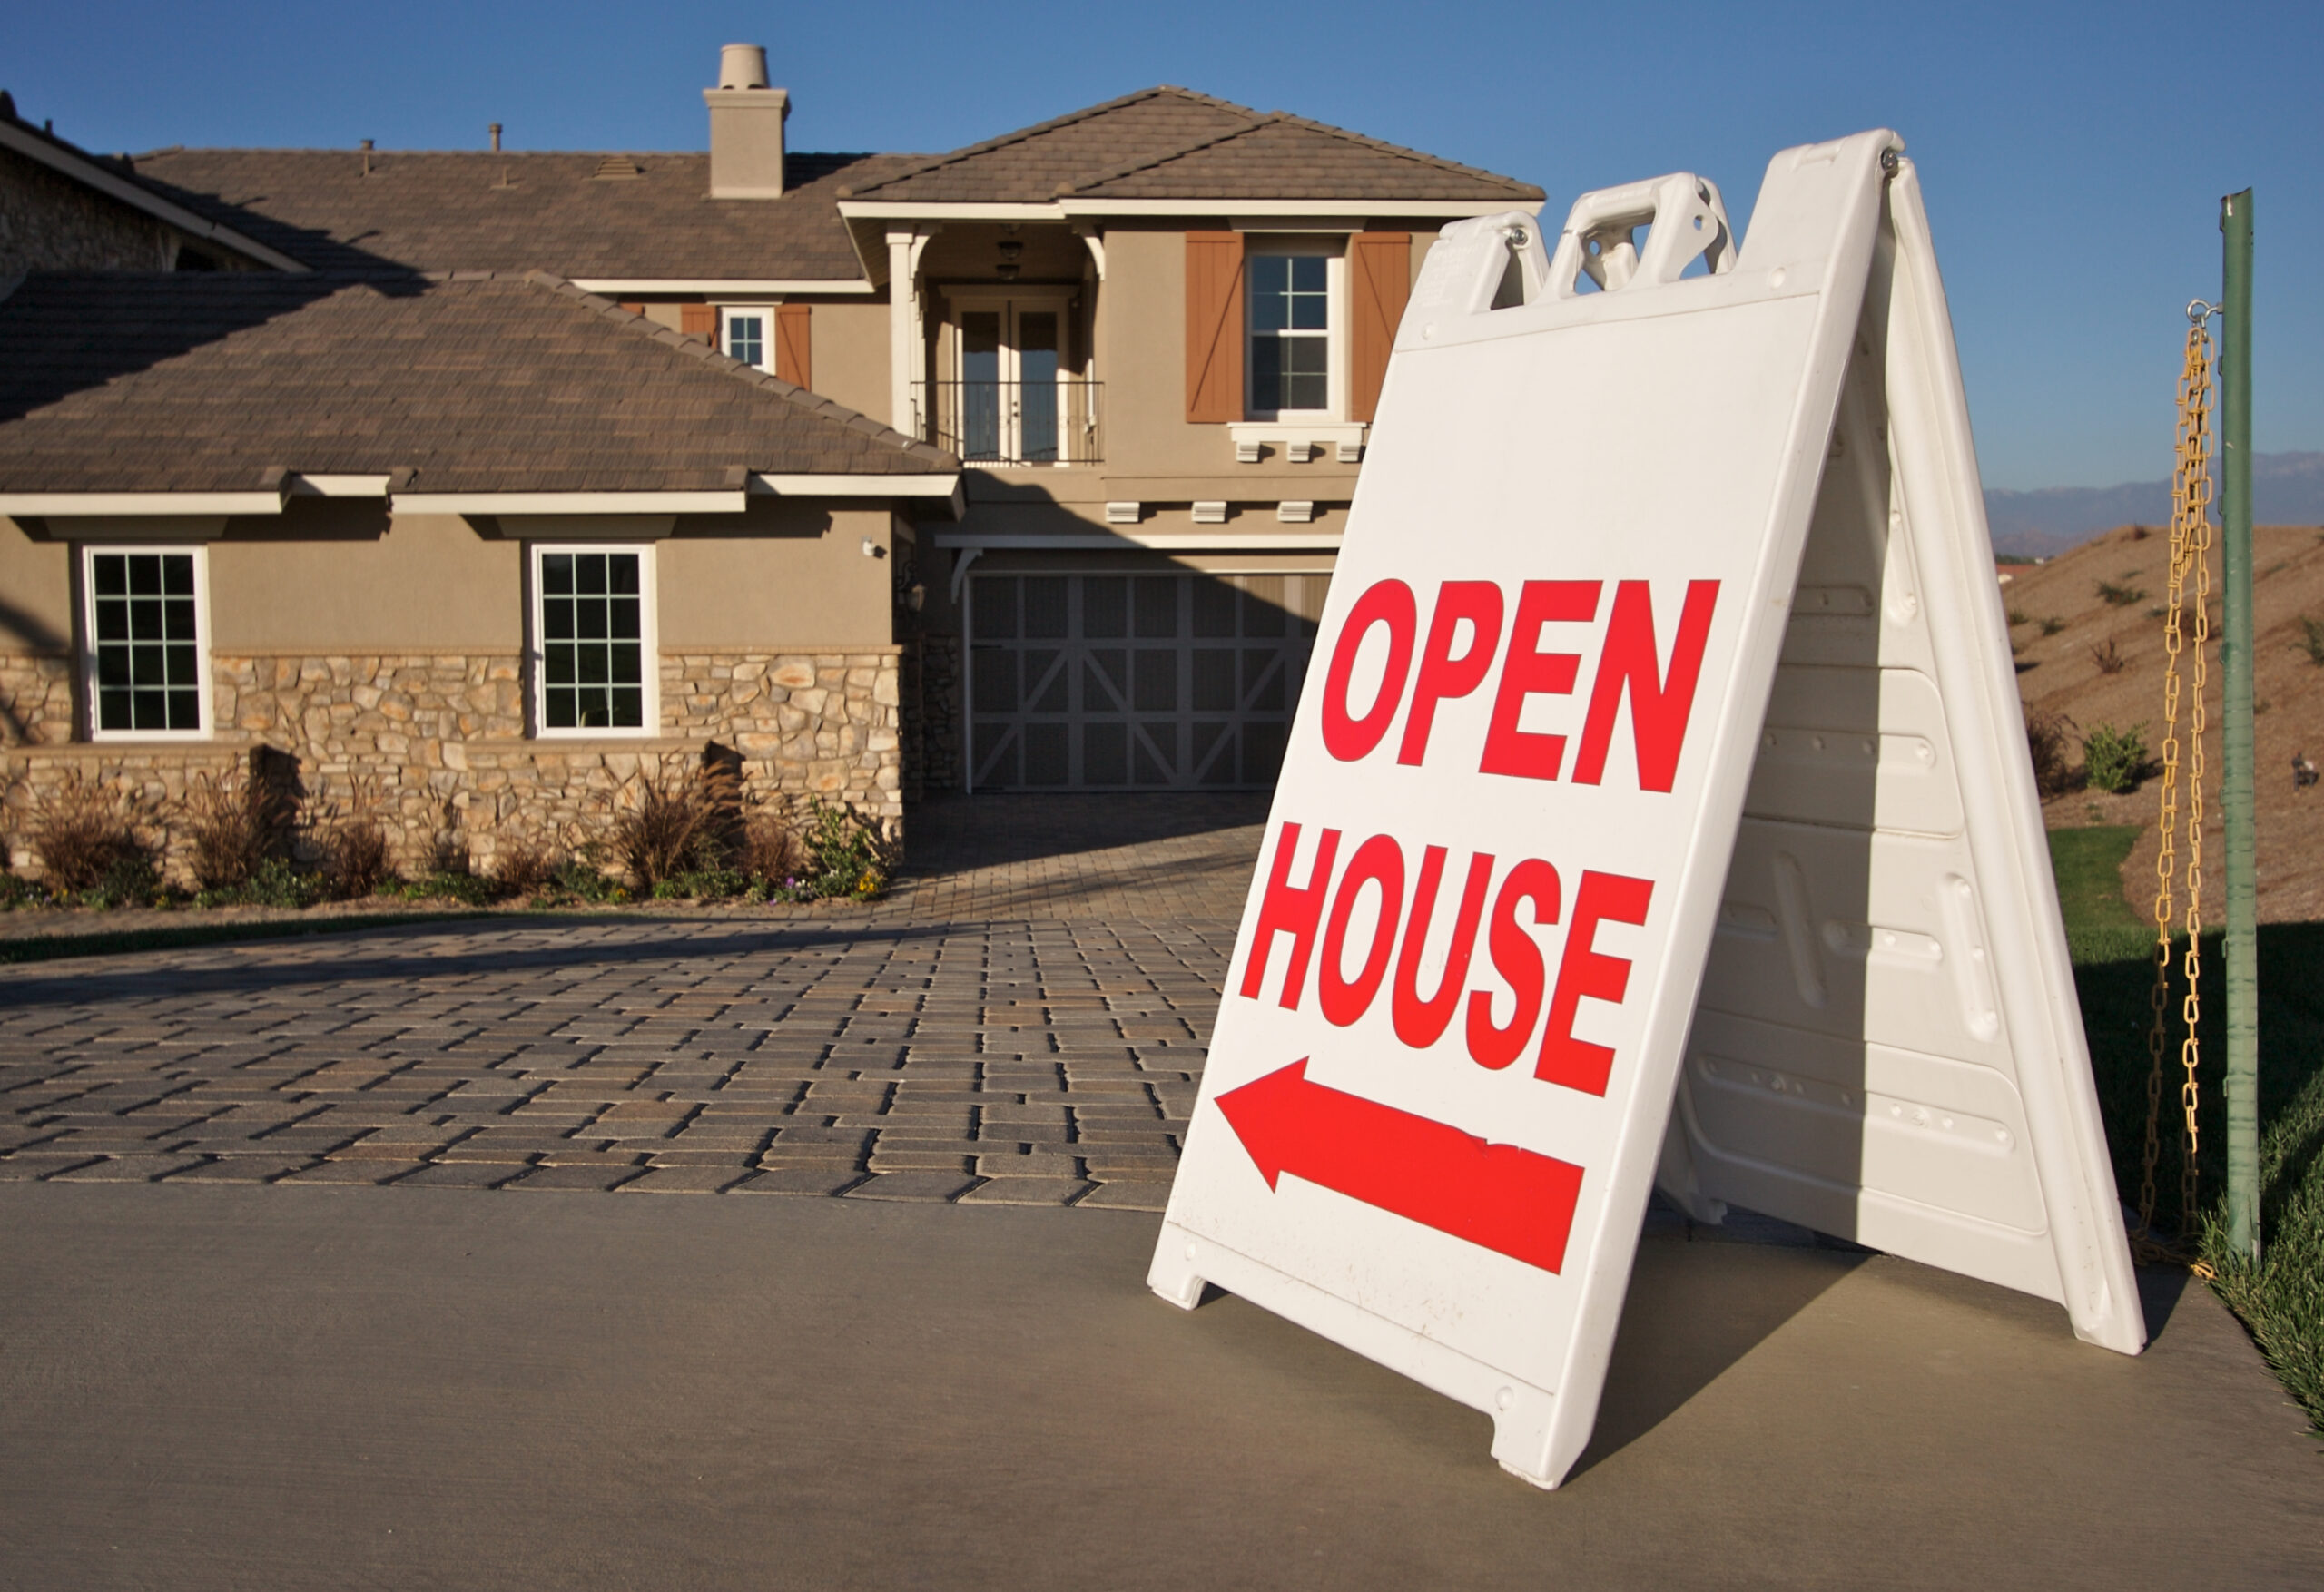 An open house sign in front of a tan-colored house.